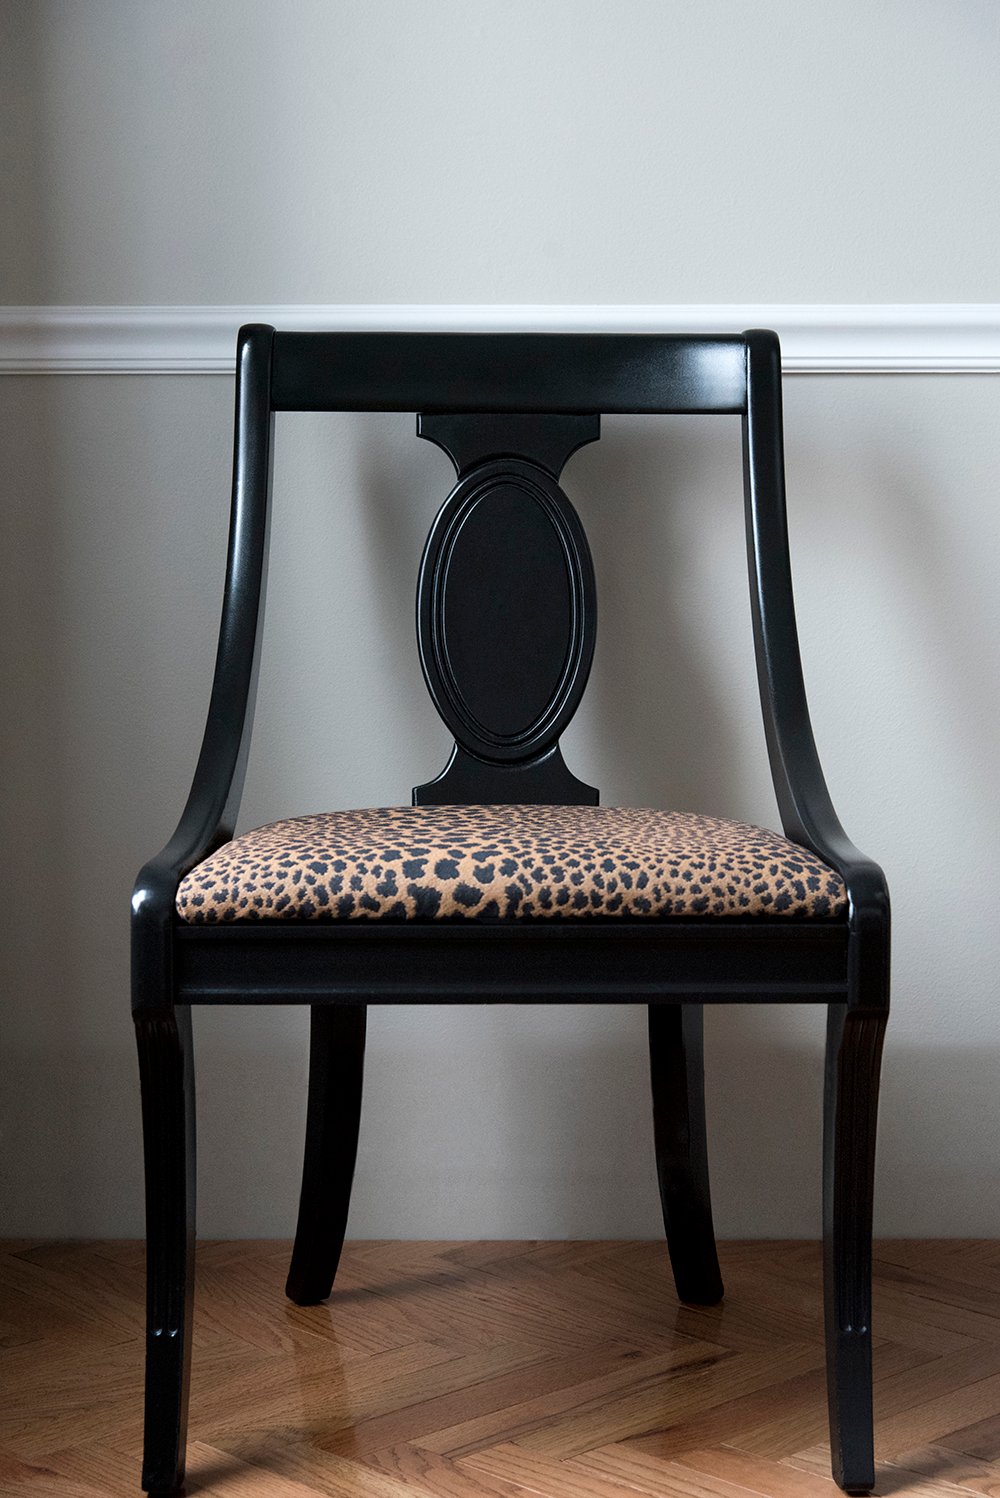 My Animal Print Chairs - A Quick Makeover